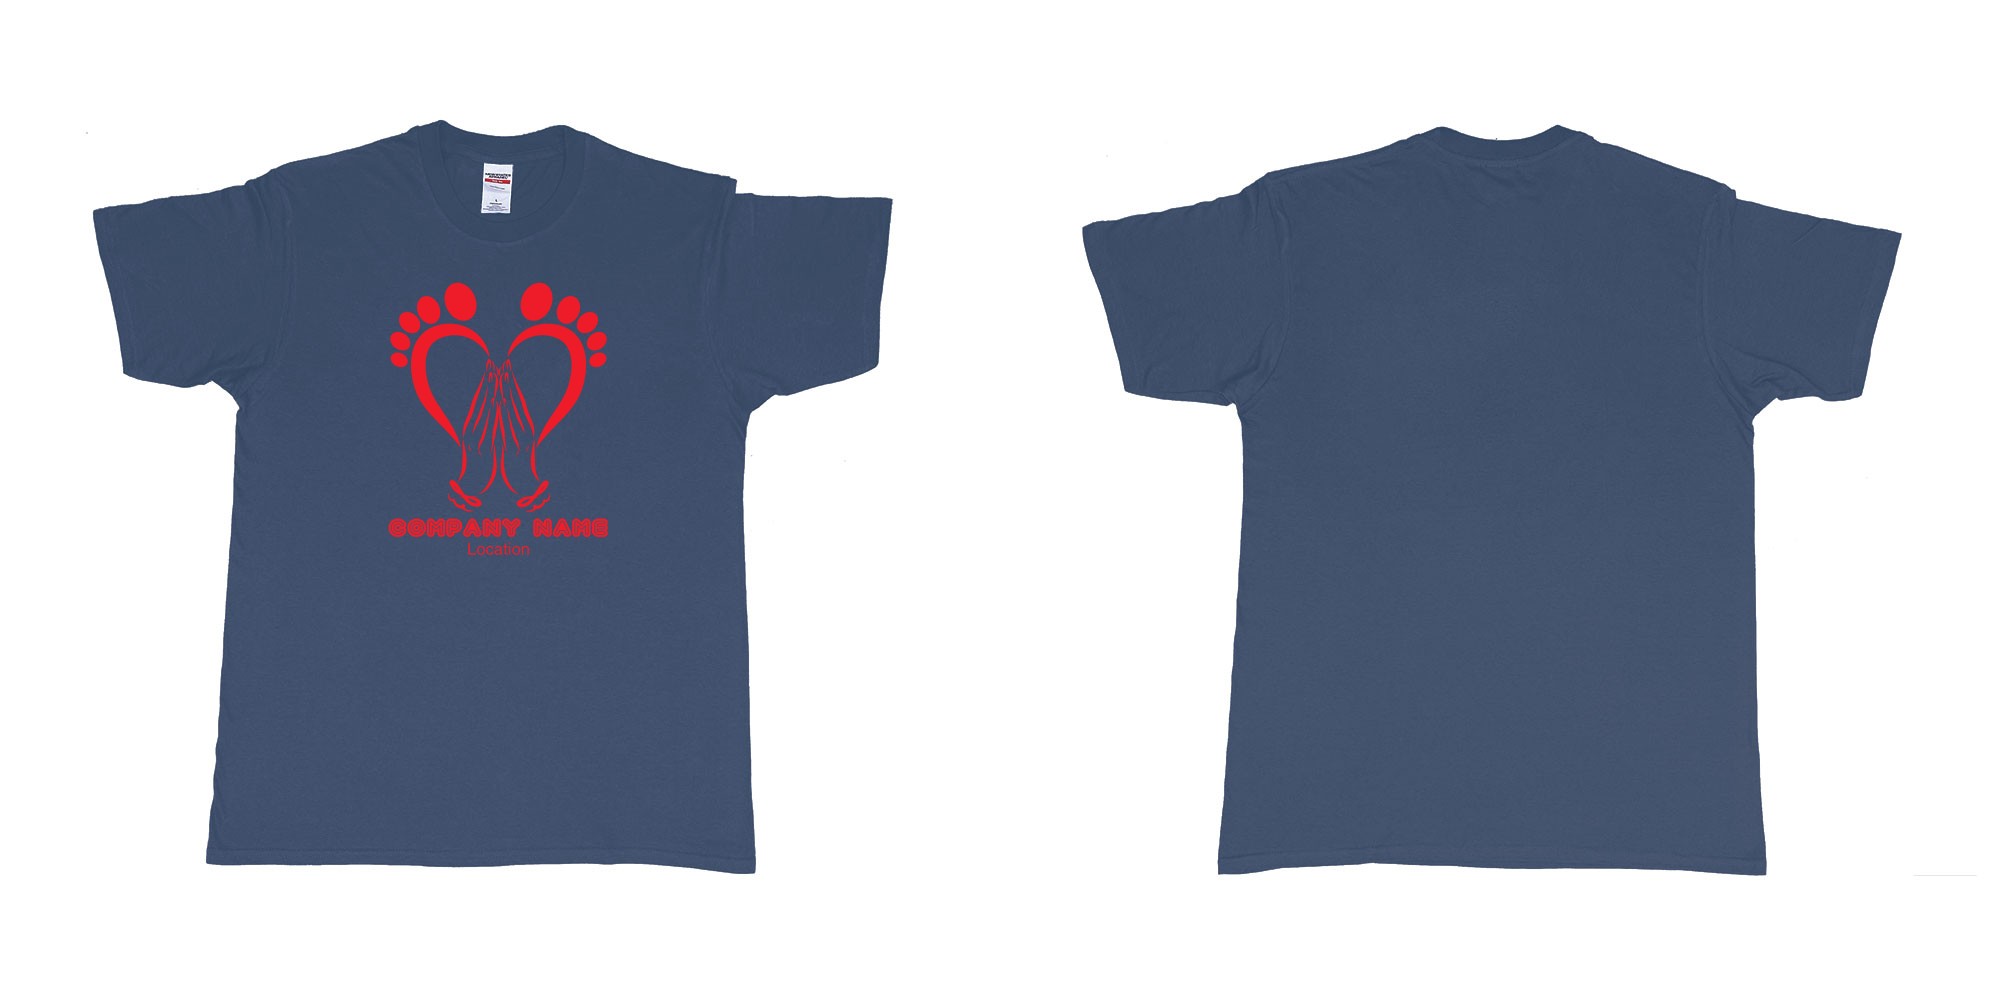 Custom tshirt design podiatrist chiropodist feet care specialist heart shaped feet with caring hands in fabric color navy choice your own text made in Bali by The Pirate Way